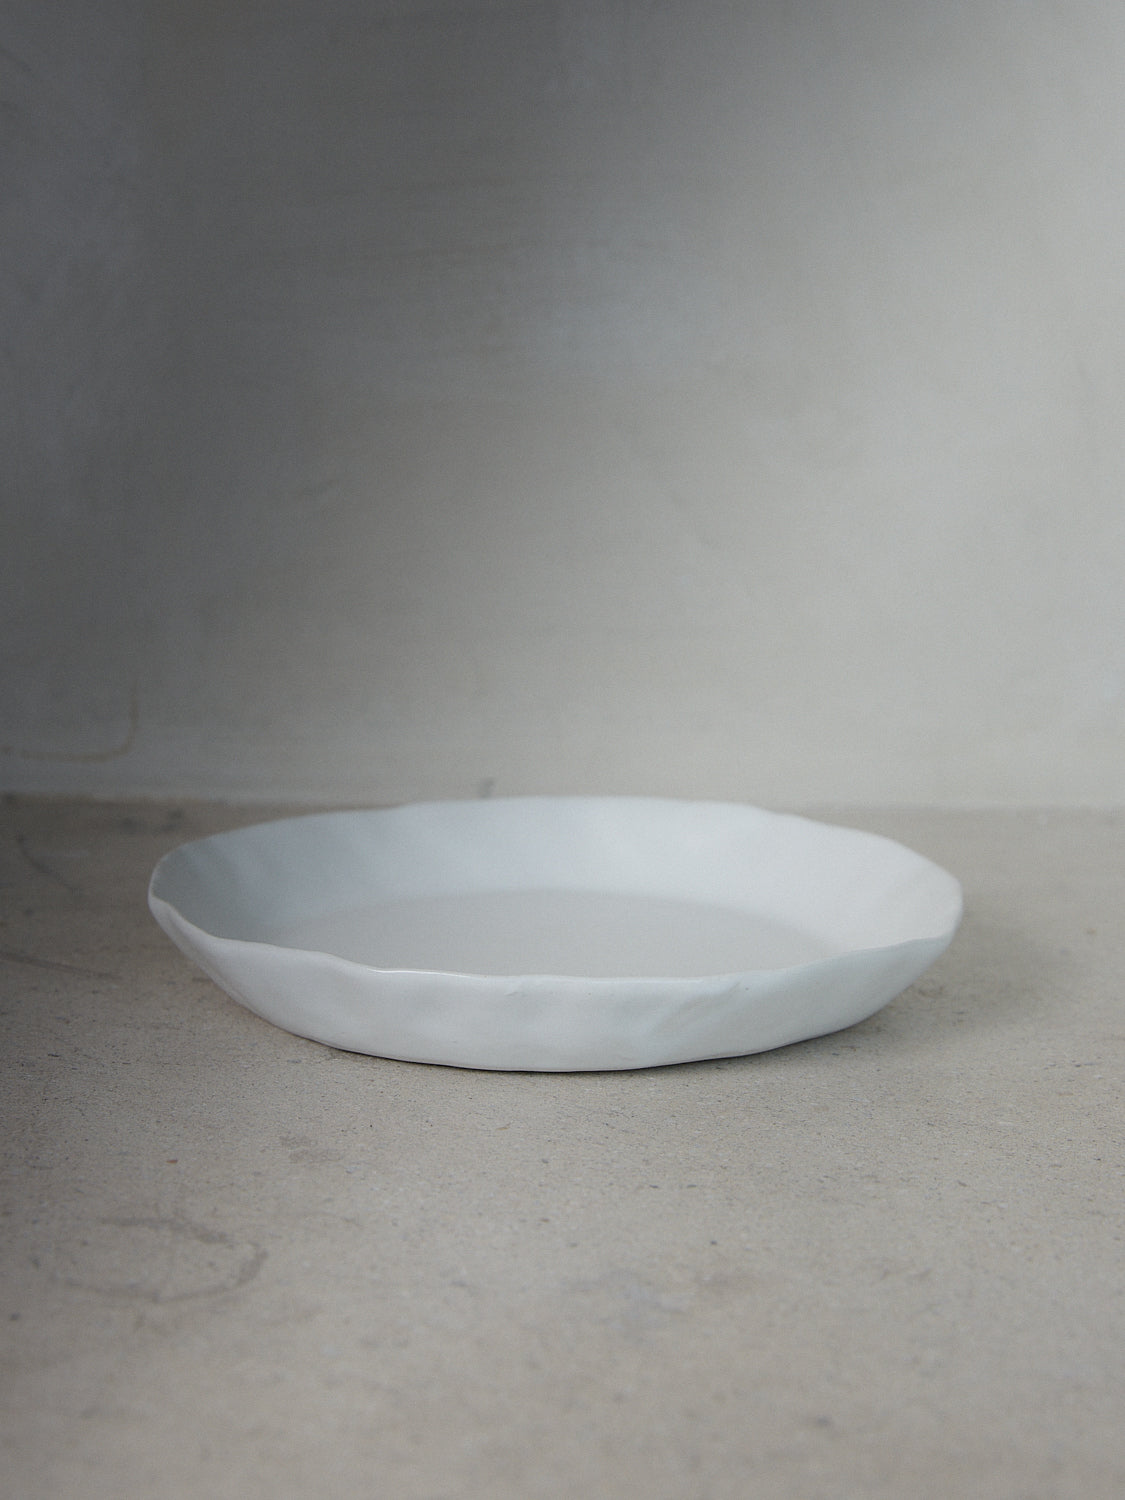 Raw Small Platter. A hand-formed rimmed platter recalling the natural world with perfectly imperfect edges in versatile matte white stoneware. 